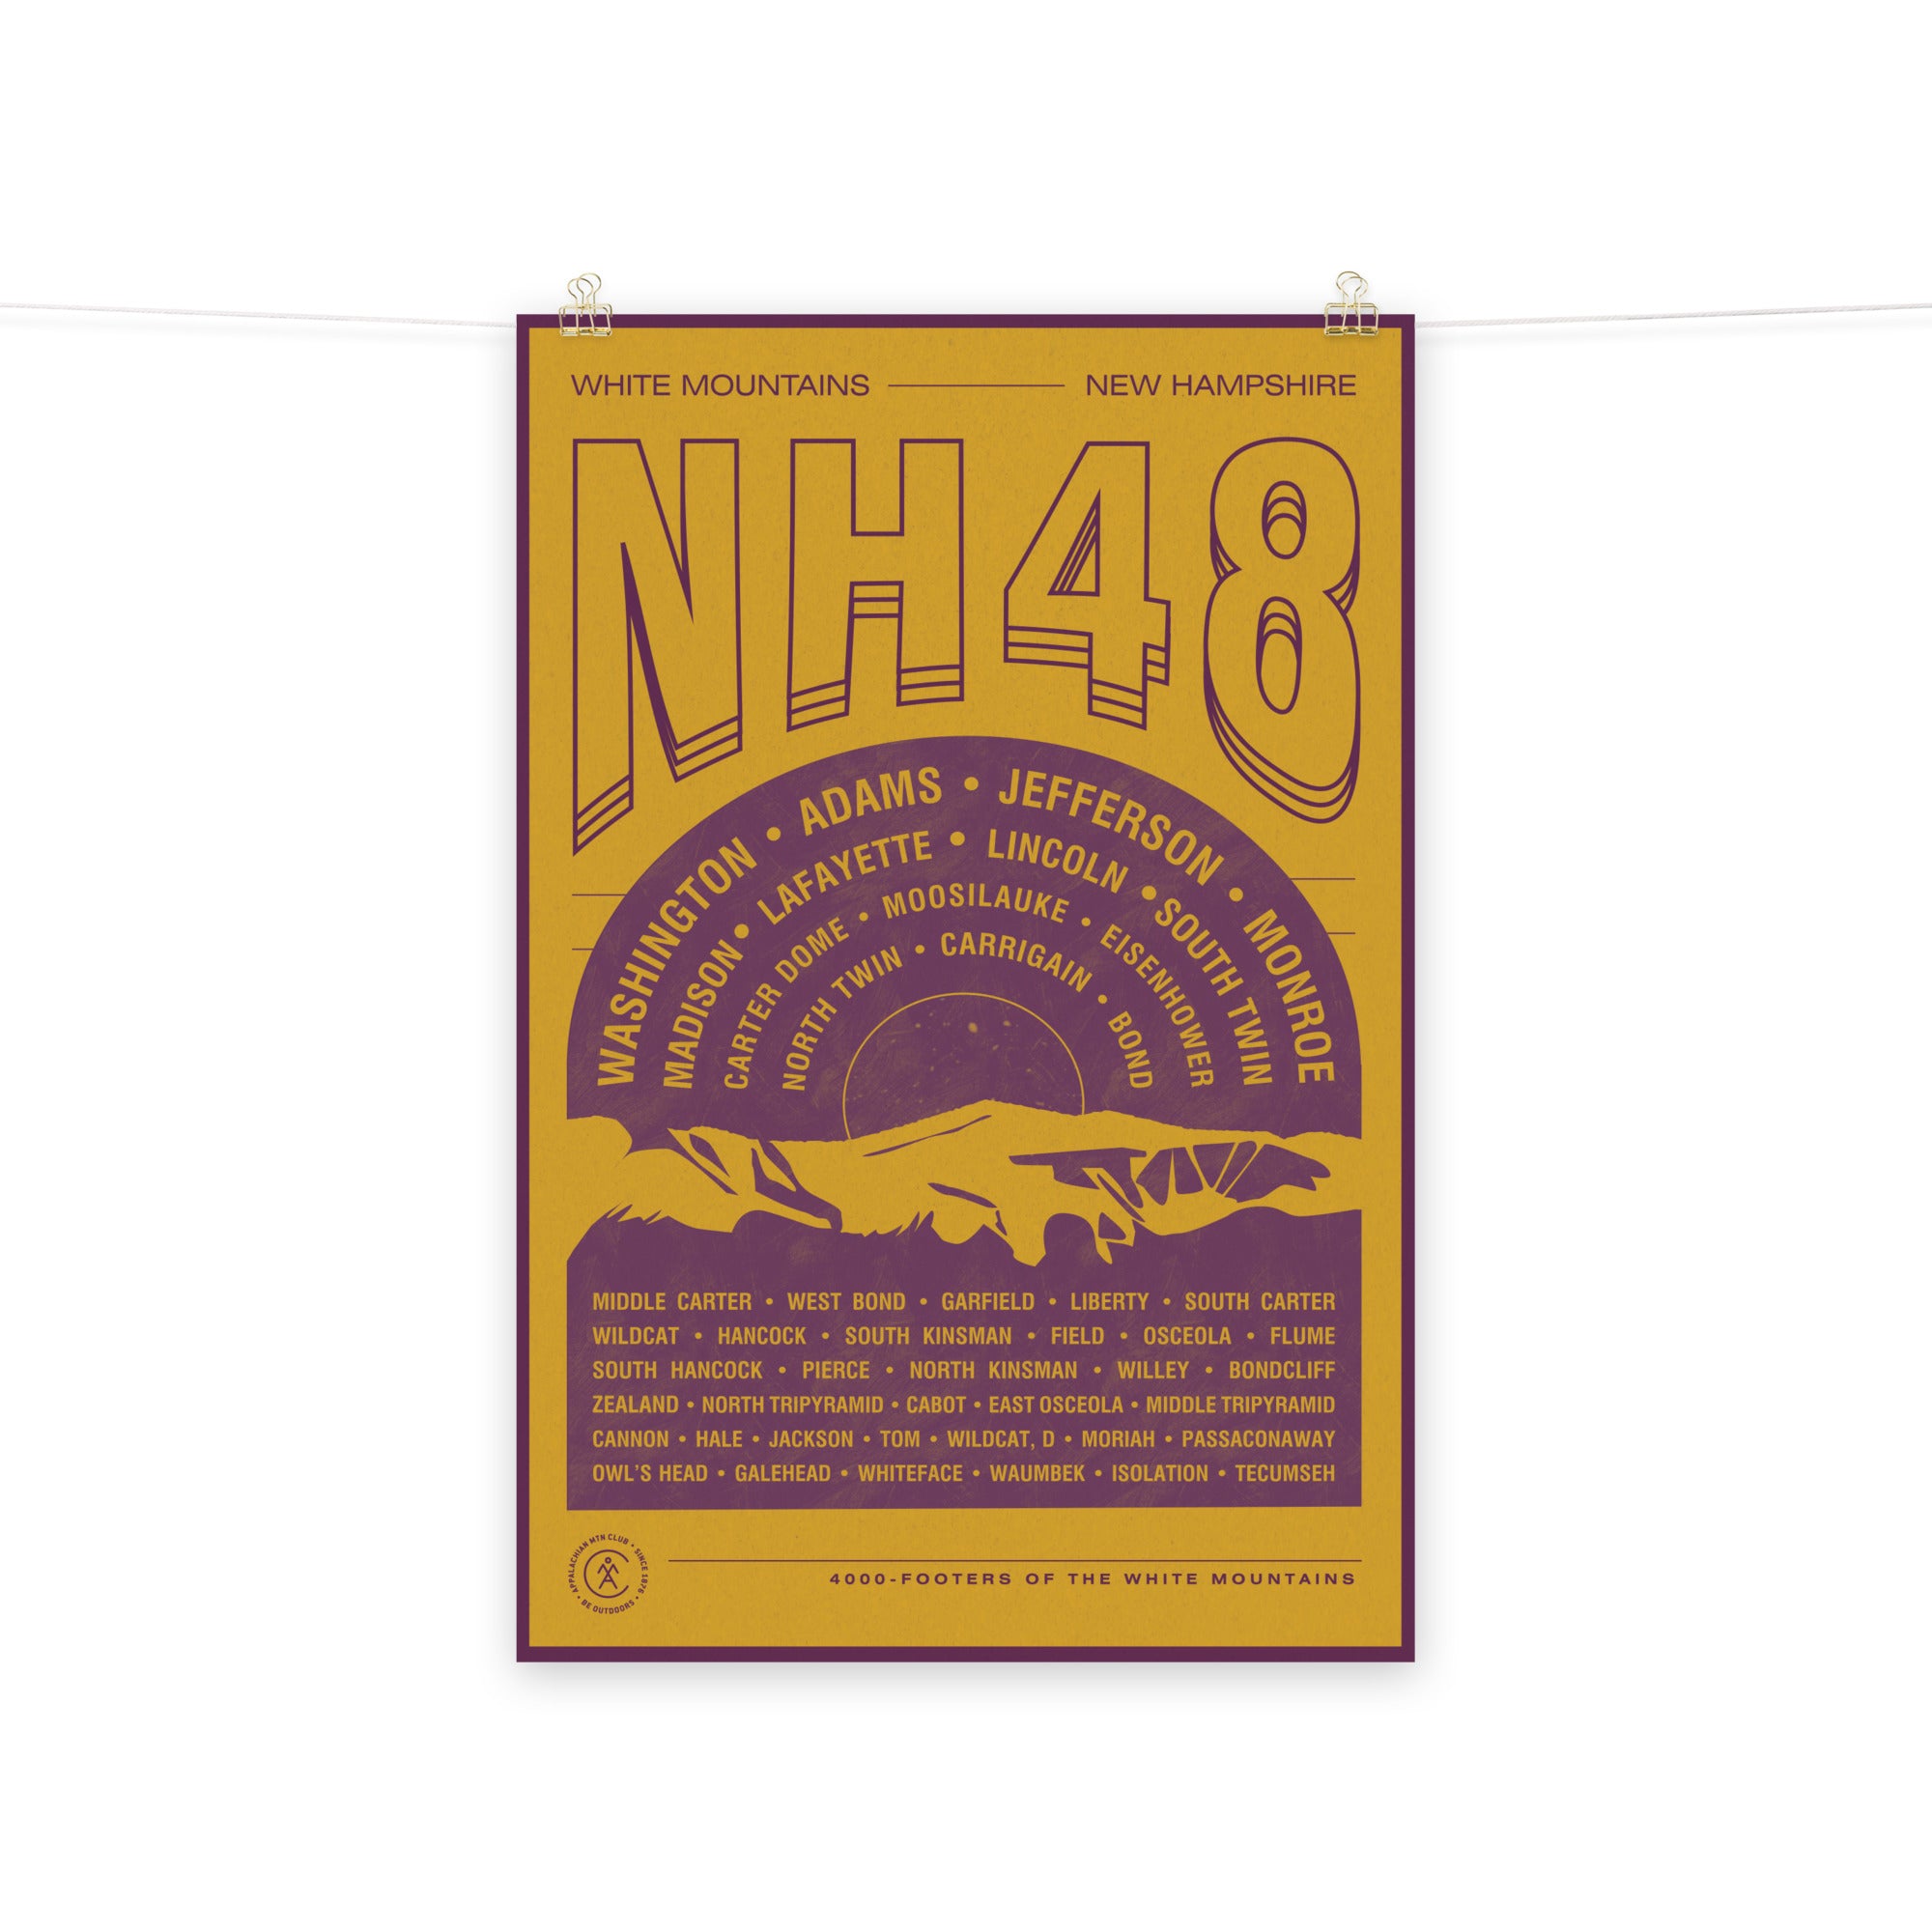 New Hampshire 4000-Footers Poster | 24 x 36